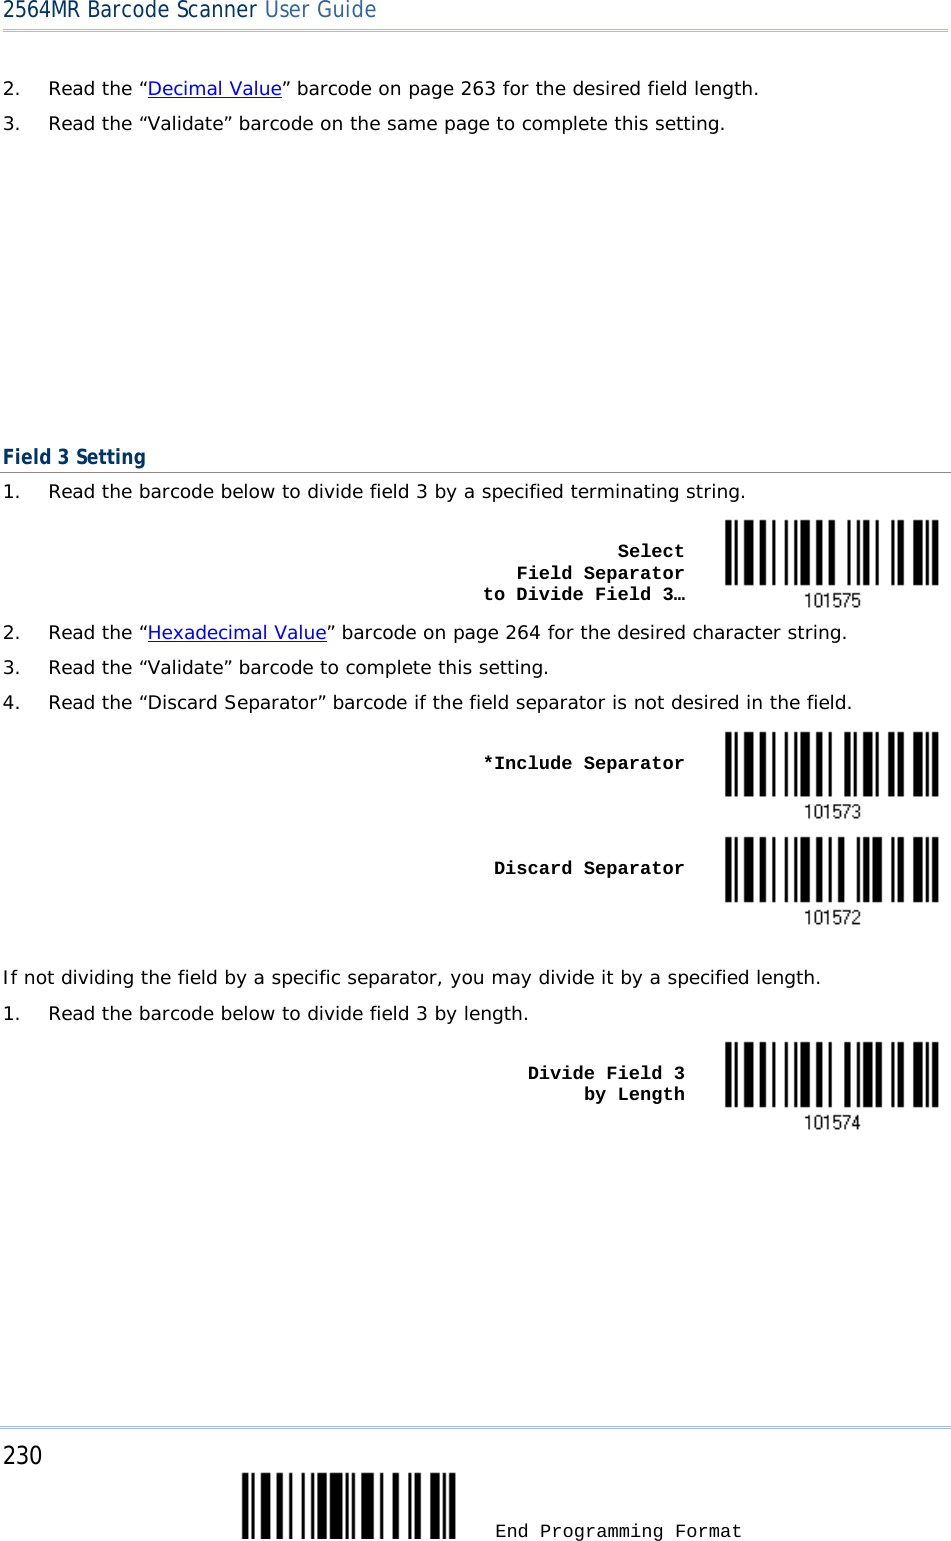 2564MR Barcode Scanner User Guide  2. Read the “Decimal Value” barcode on page 263 for the desired field length. 3. Read the “Validate” barcode on the same page to complete this setting.         Field 3 Setting 1. Read the barcode below to divide field 3 by a specified terminating string.    Select          Field Separator    to Divide Field 3…  2. Read the “Hexadecimal Value” barcode on page 264 for the desired character string. 3. Read the “Validate” barcode to complete this setting. 4. Read the “Discard Separator” barcode if the field separator is not desired in the field.    *Include Separator     Discard Separator   If not dividing the field by a specific separator, you may divide it by a specified length. 1. Read the barcode below to divide field 3 by length.    Divide Field 3      by Length  230  End Programming Format 